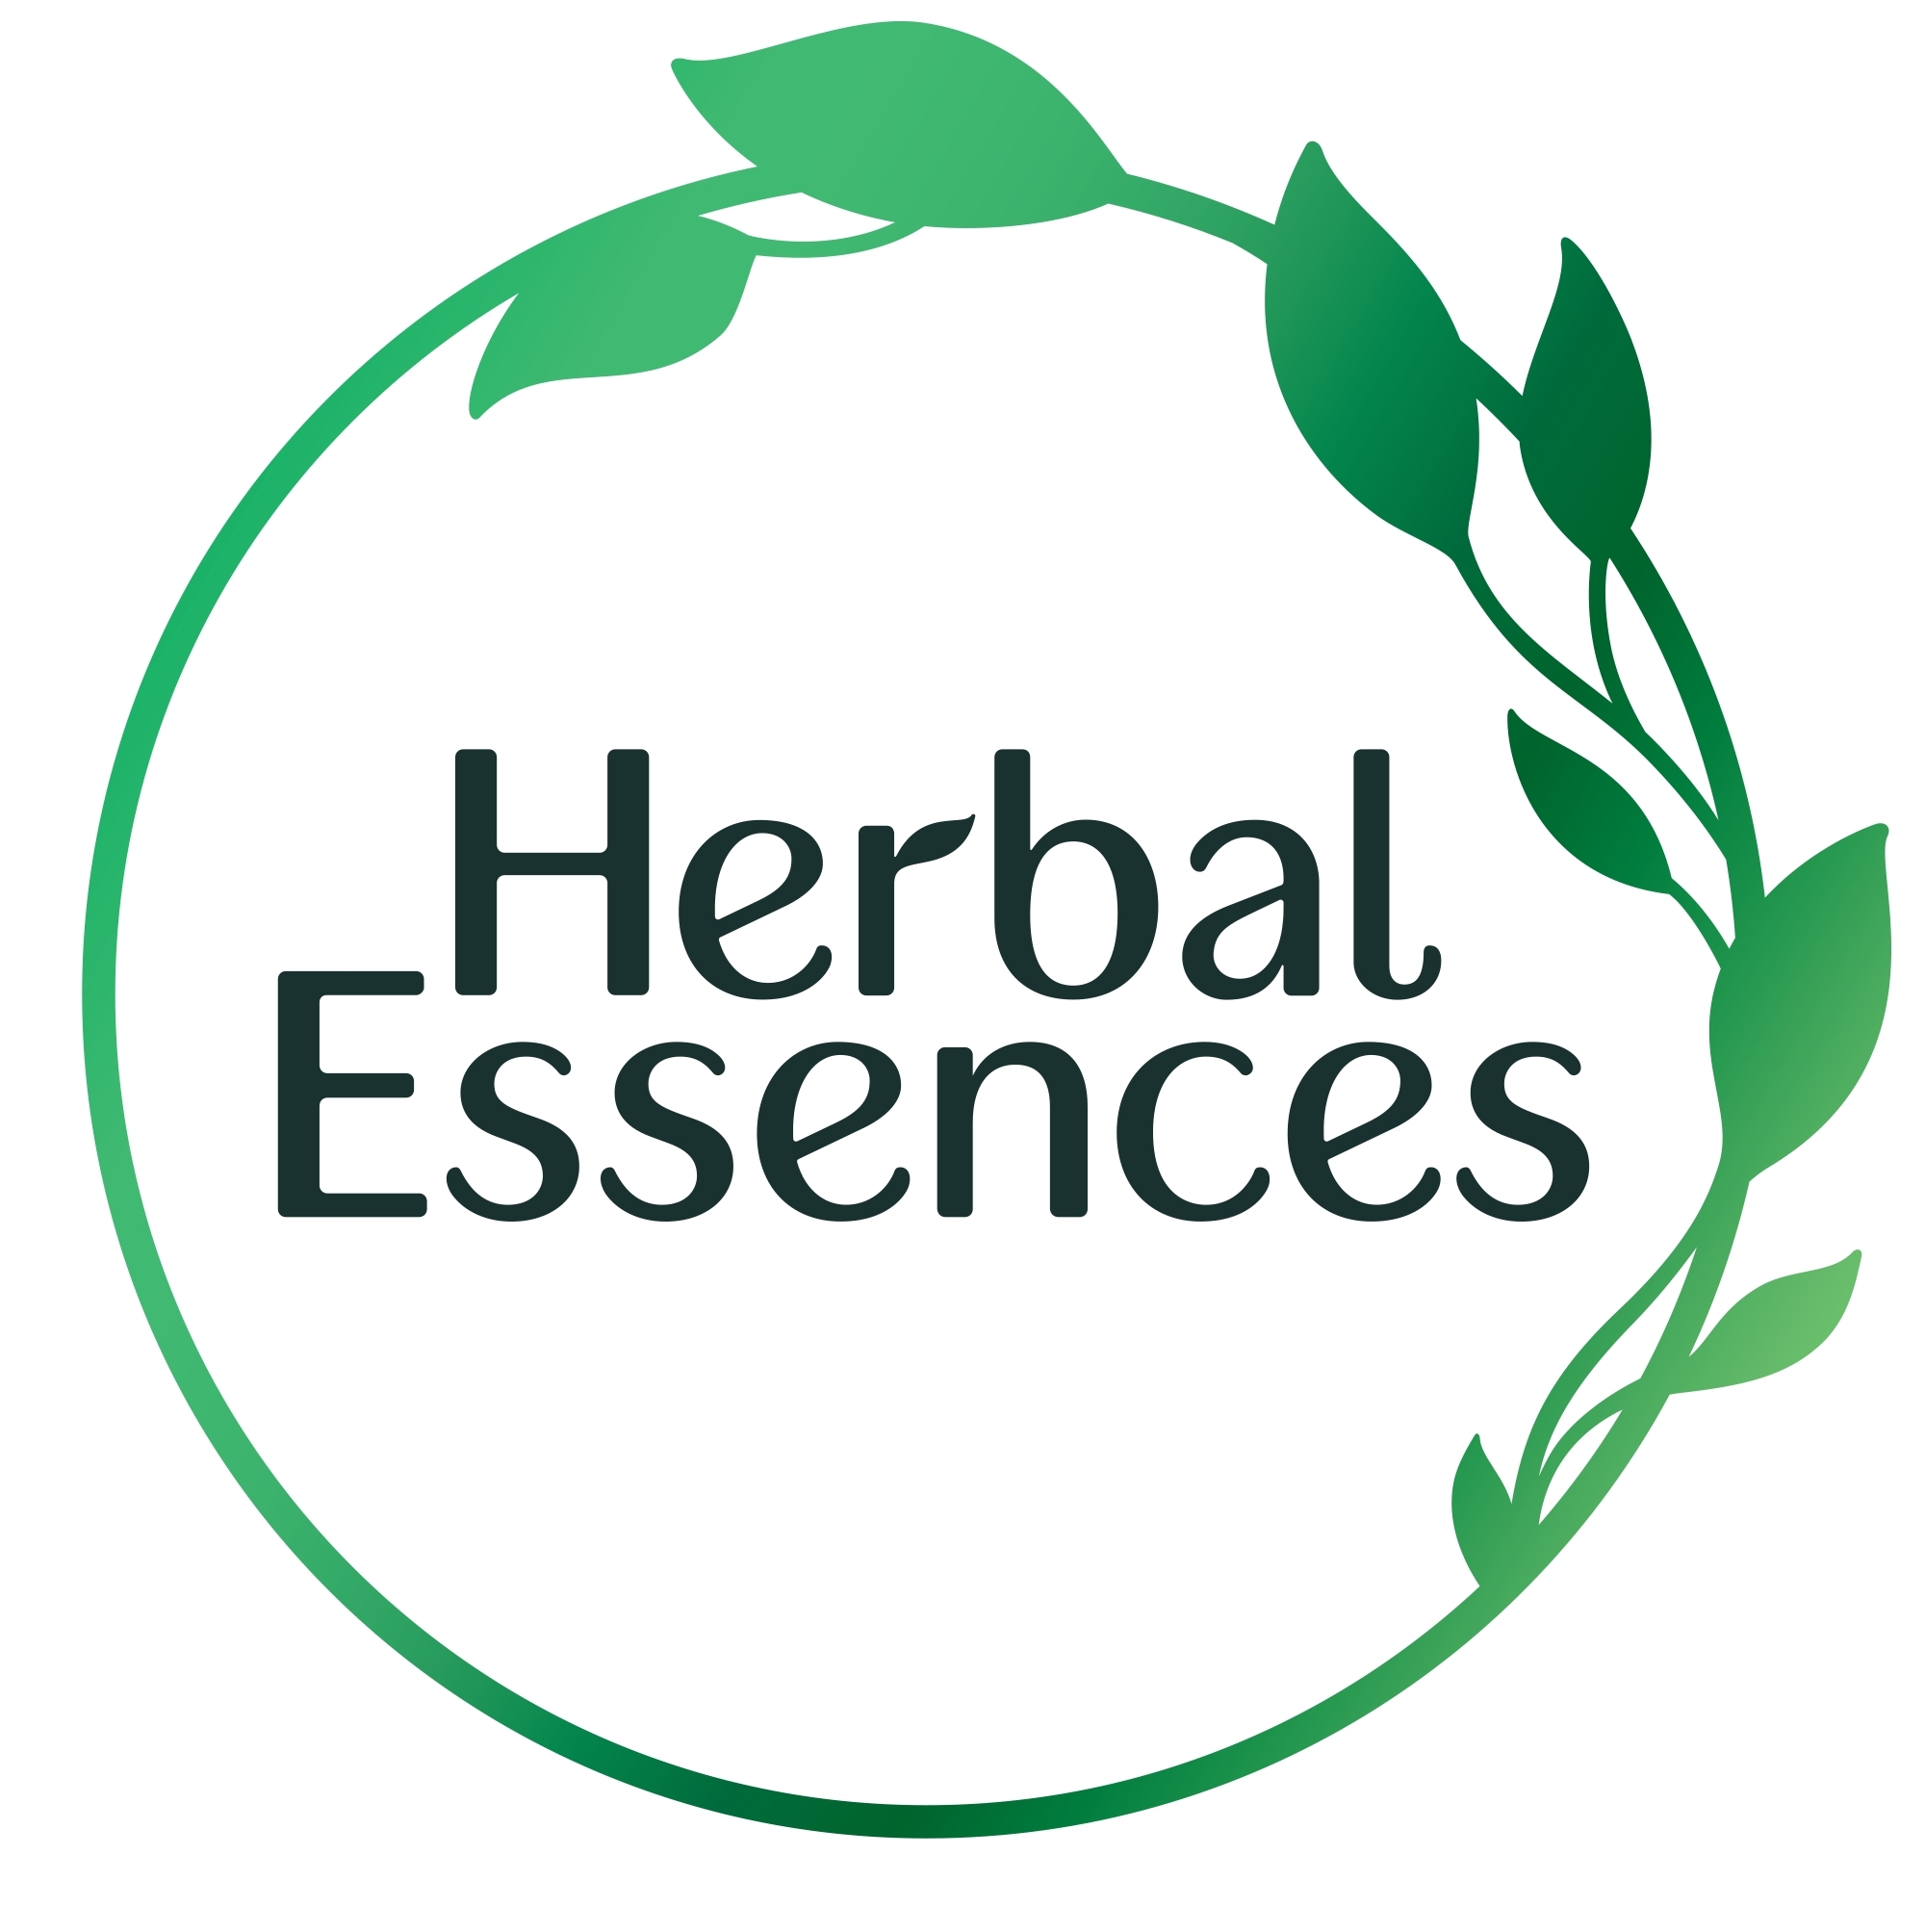 Herbal Essences Becomes First Mass Hair Care Brand in Mass Retailers to  Meet the Strict Clean Beauty Standards of EWG VERIFIED TM | Business Wire